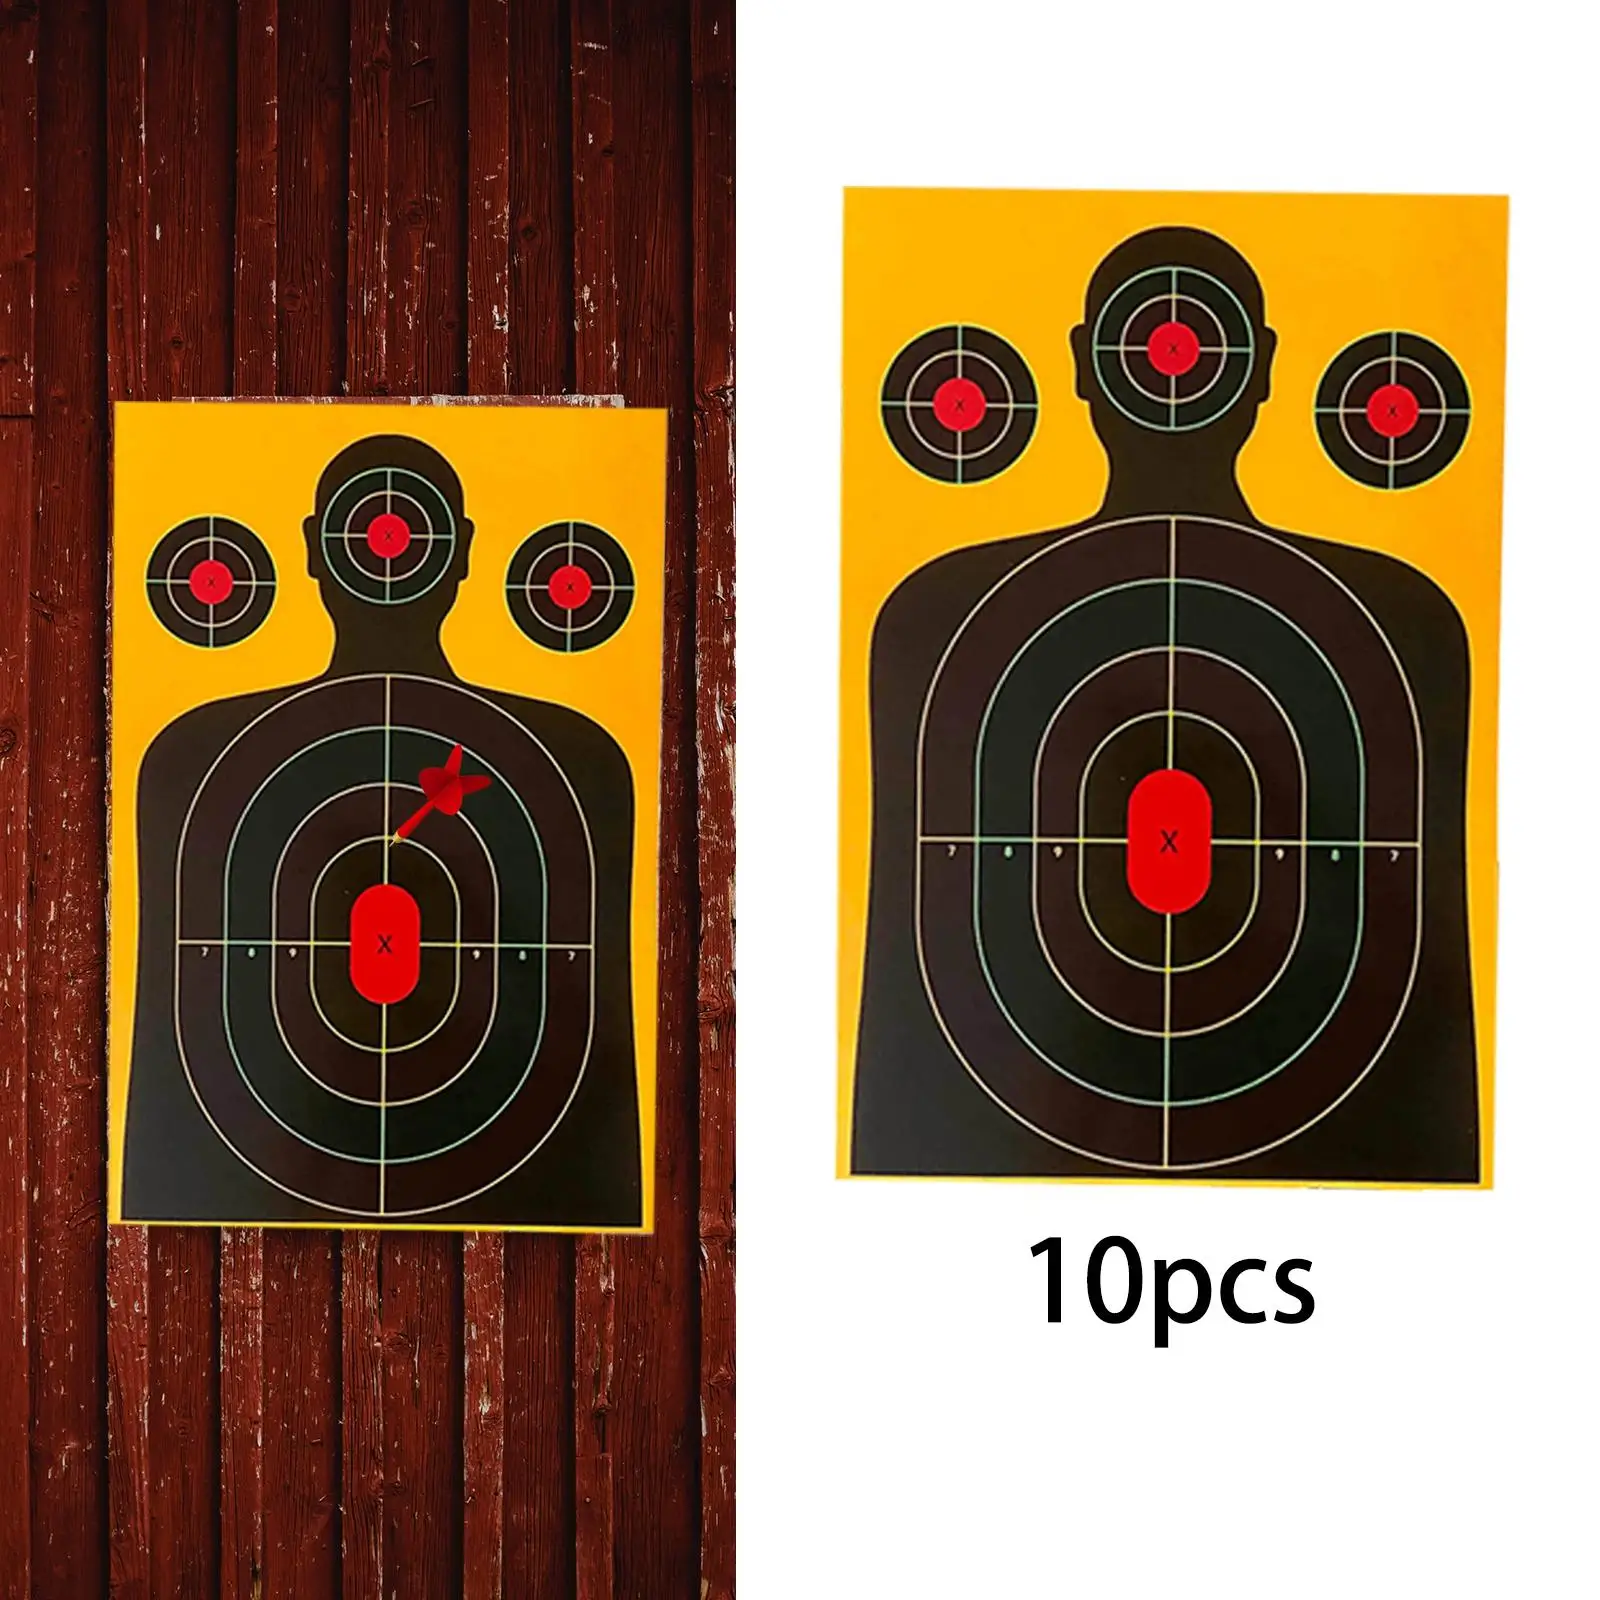 10Pcs Silhouette Target Target Paper Professional Sturdy Hunting Target Training